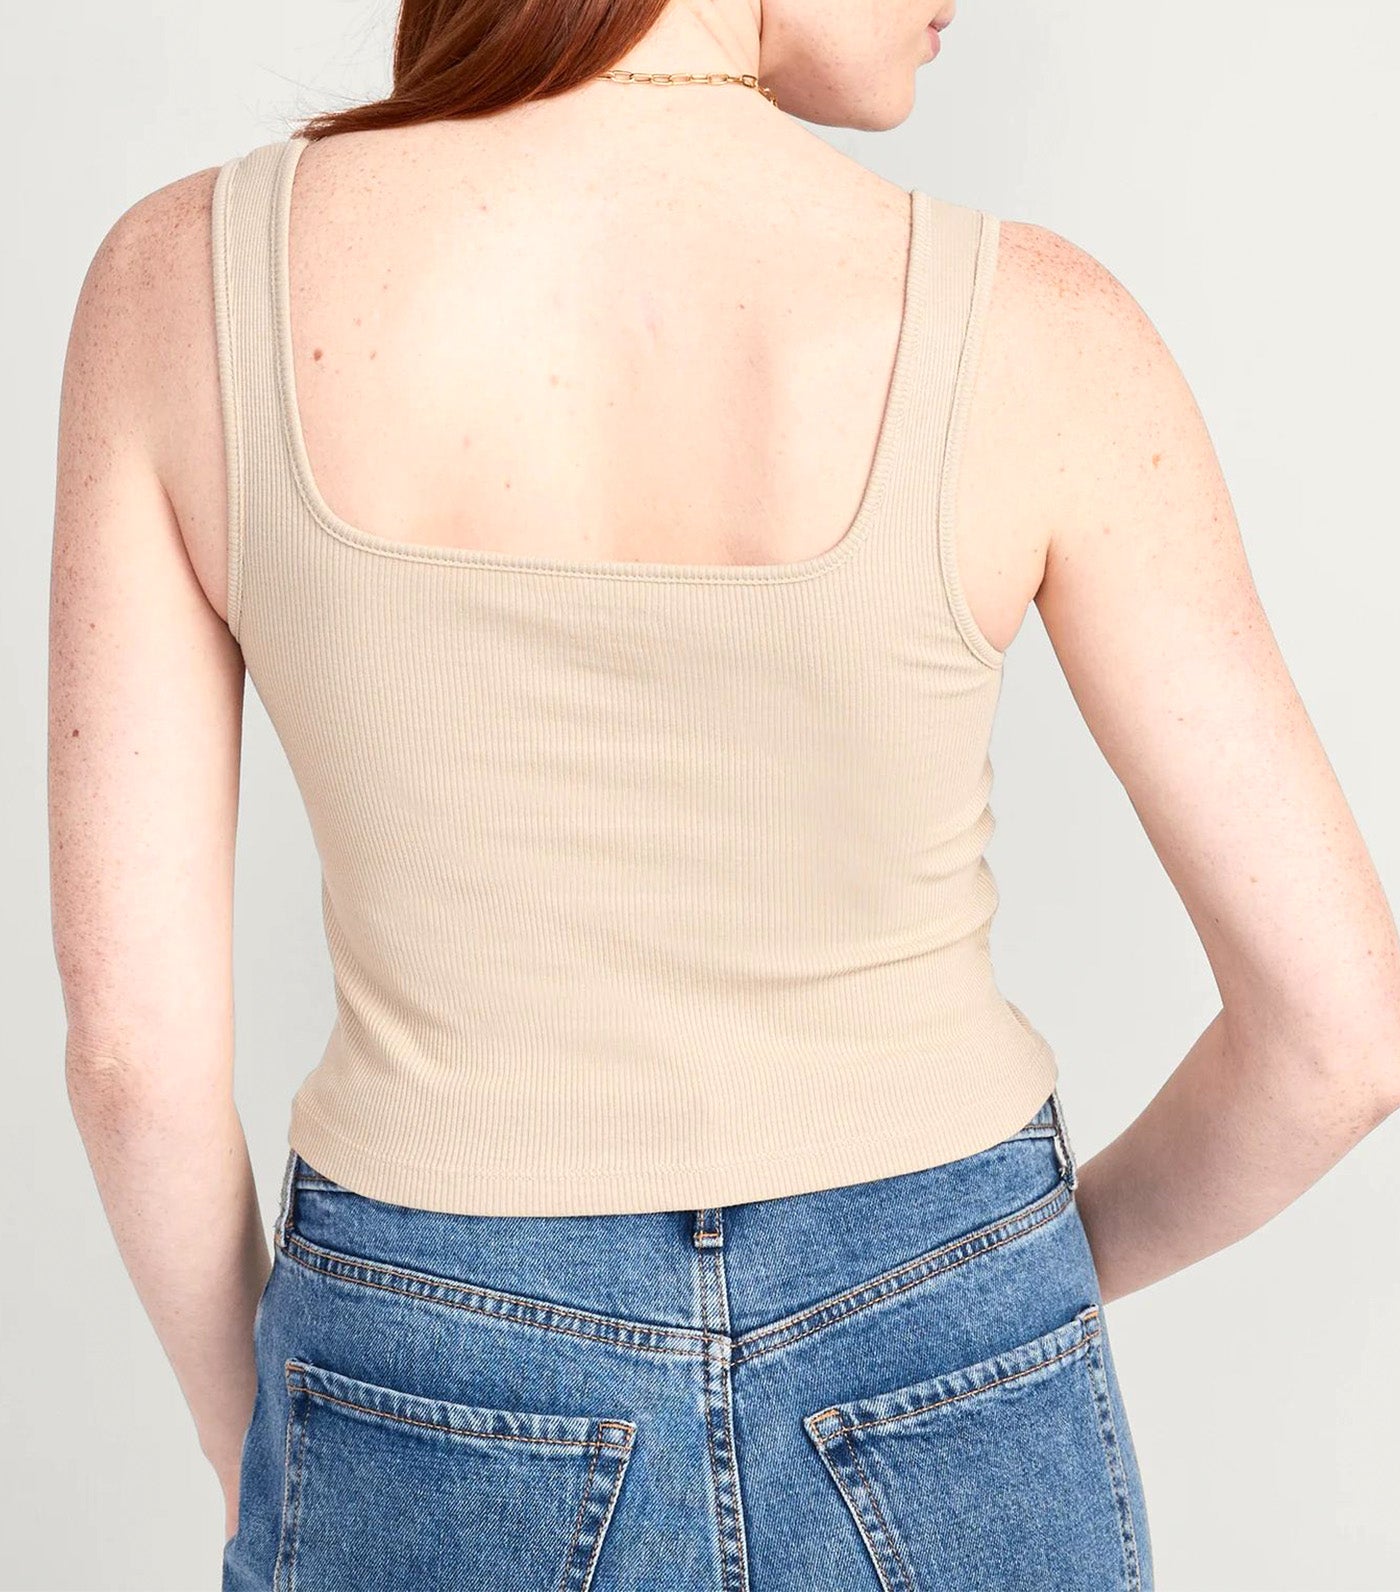 Fitted Square-Neck Ultra-Cropped Rib-Knit Tank Top for Women Dried Linen